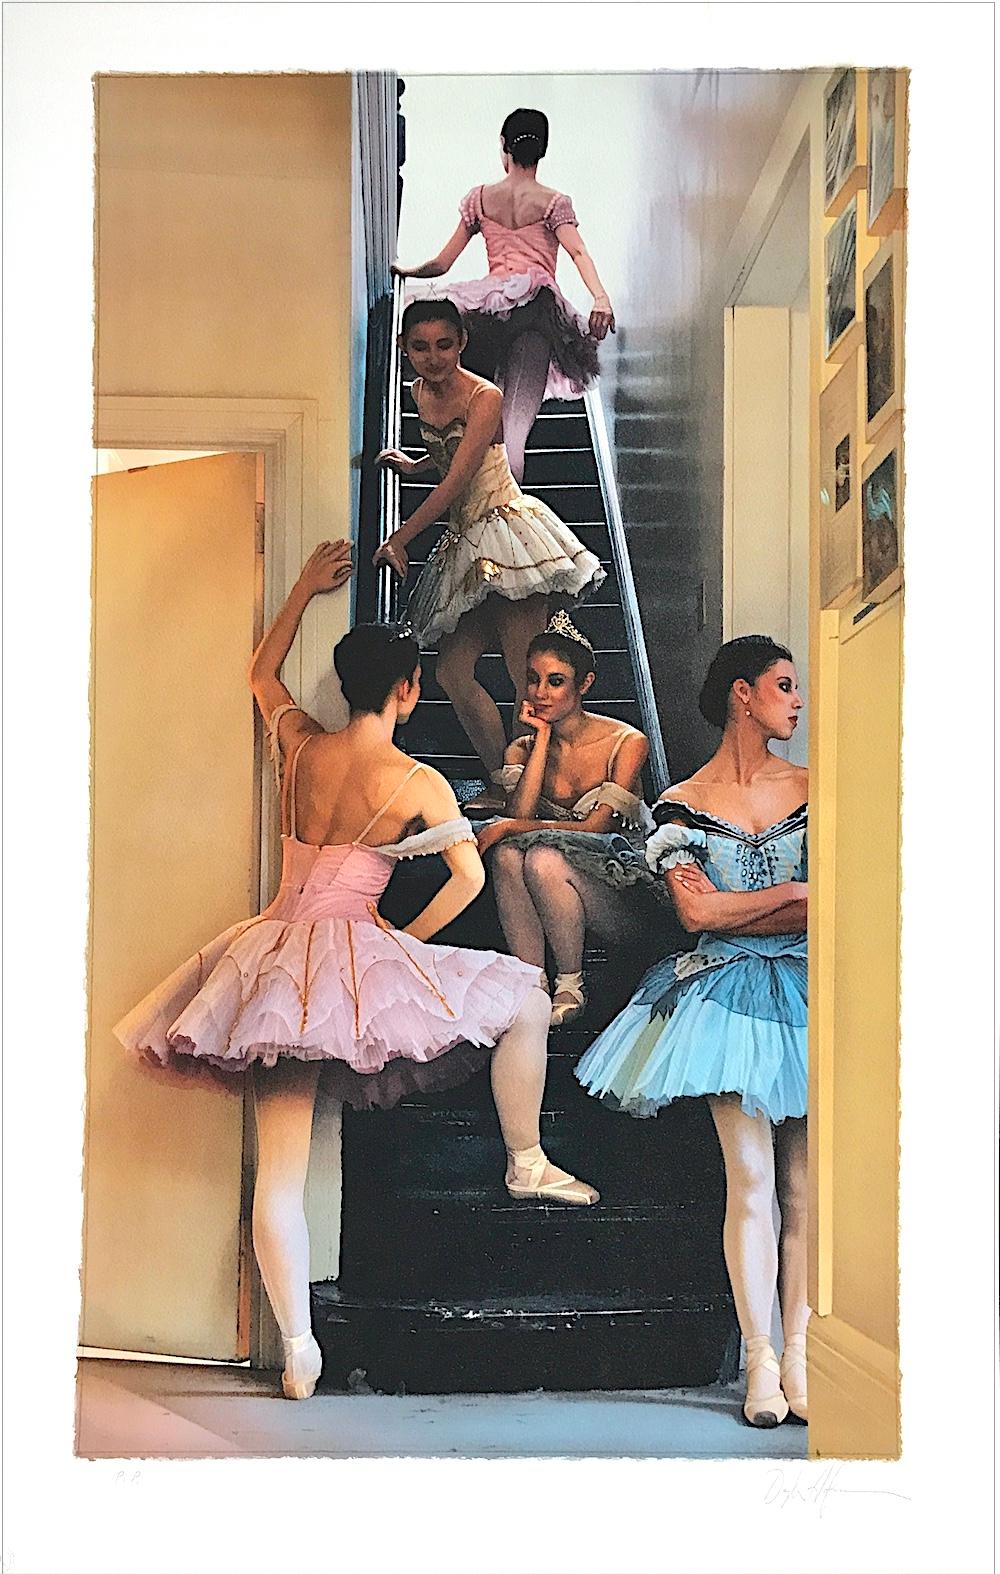 Douglas Hofmann Figurative Print - WAITING IN THE WINGS Signed Lithograph, Ballet Dancers on Stairs Pink Blue Tutus